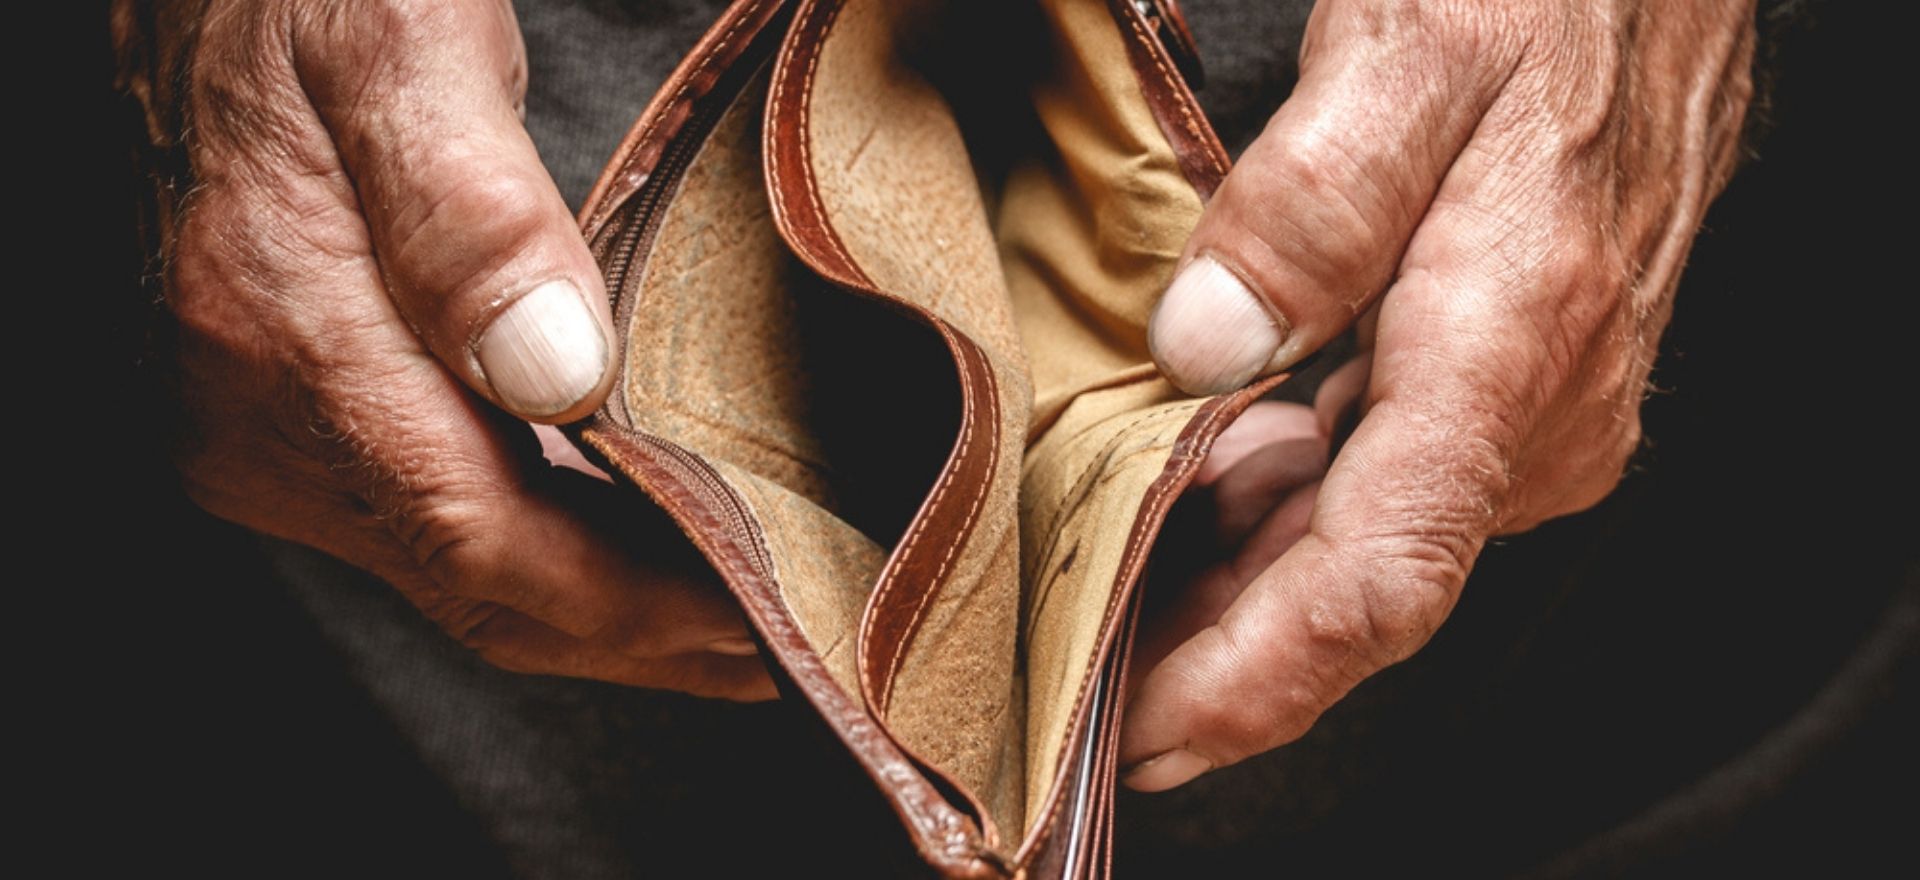 Empty wallet in the hands of an elderly person